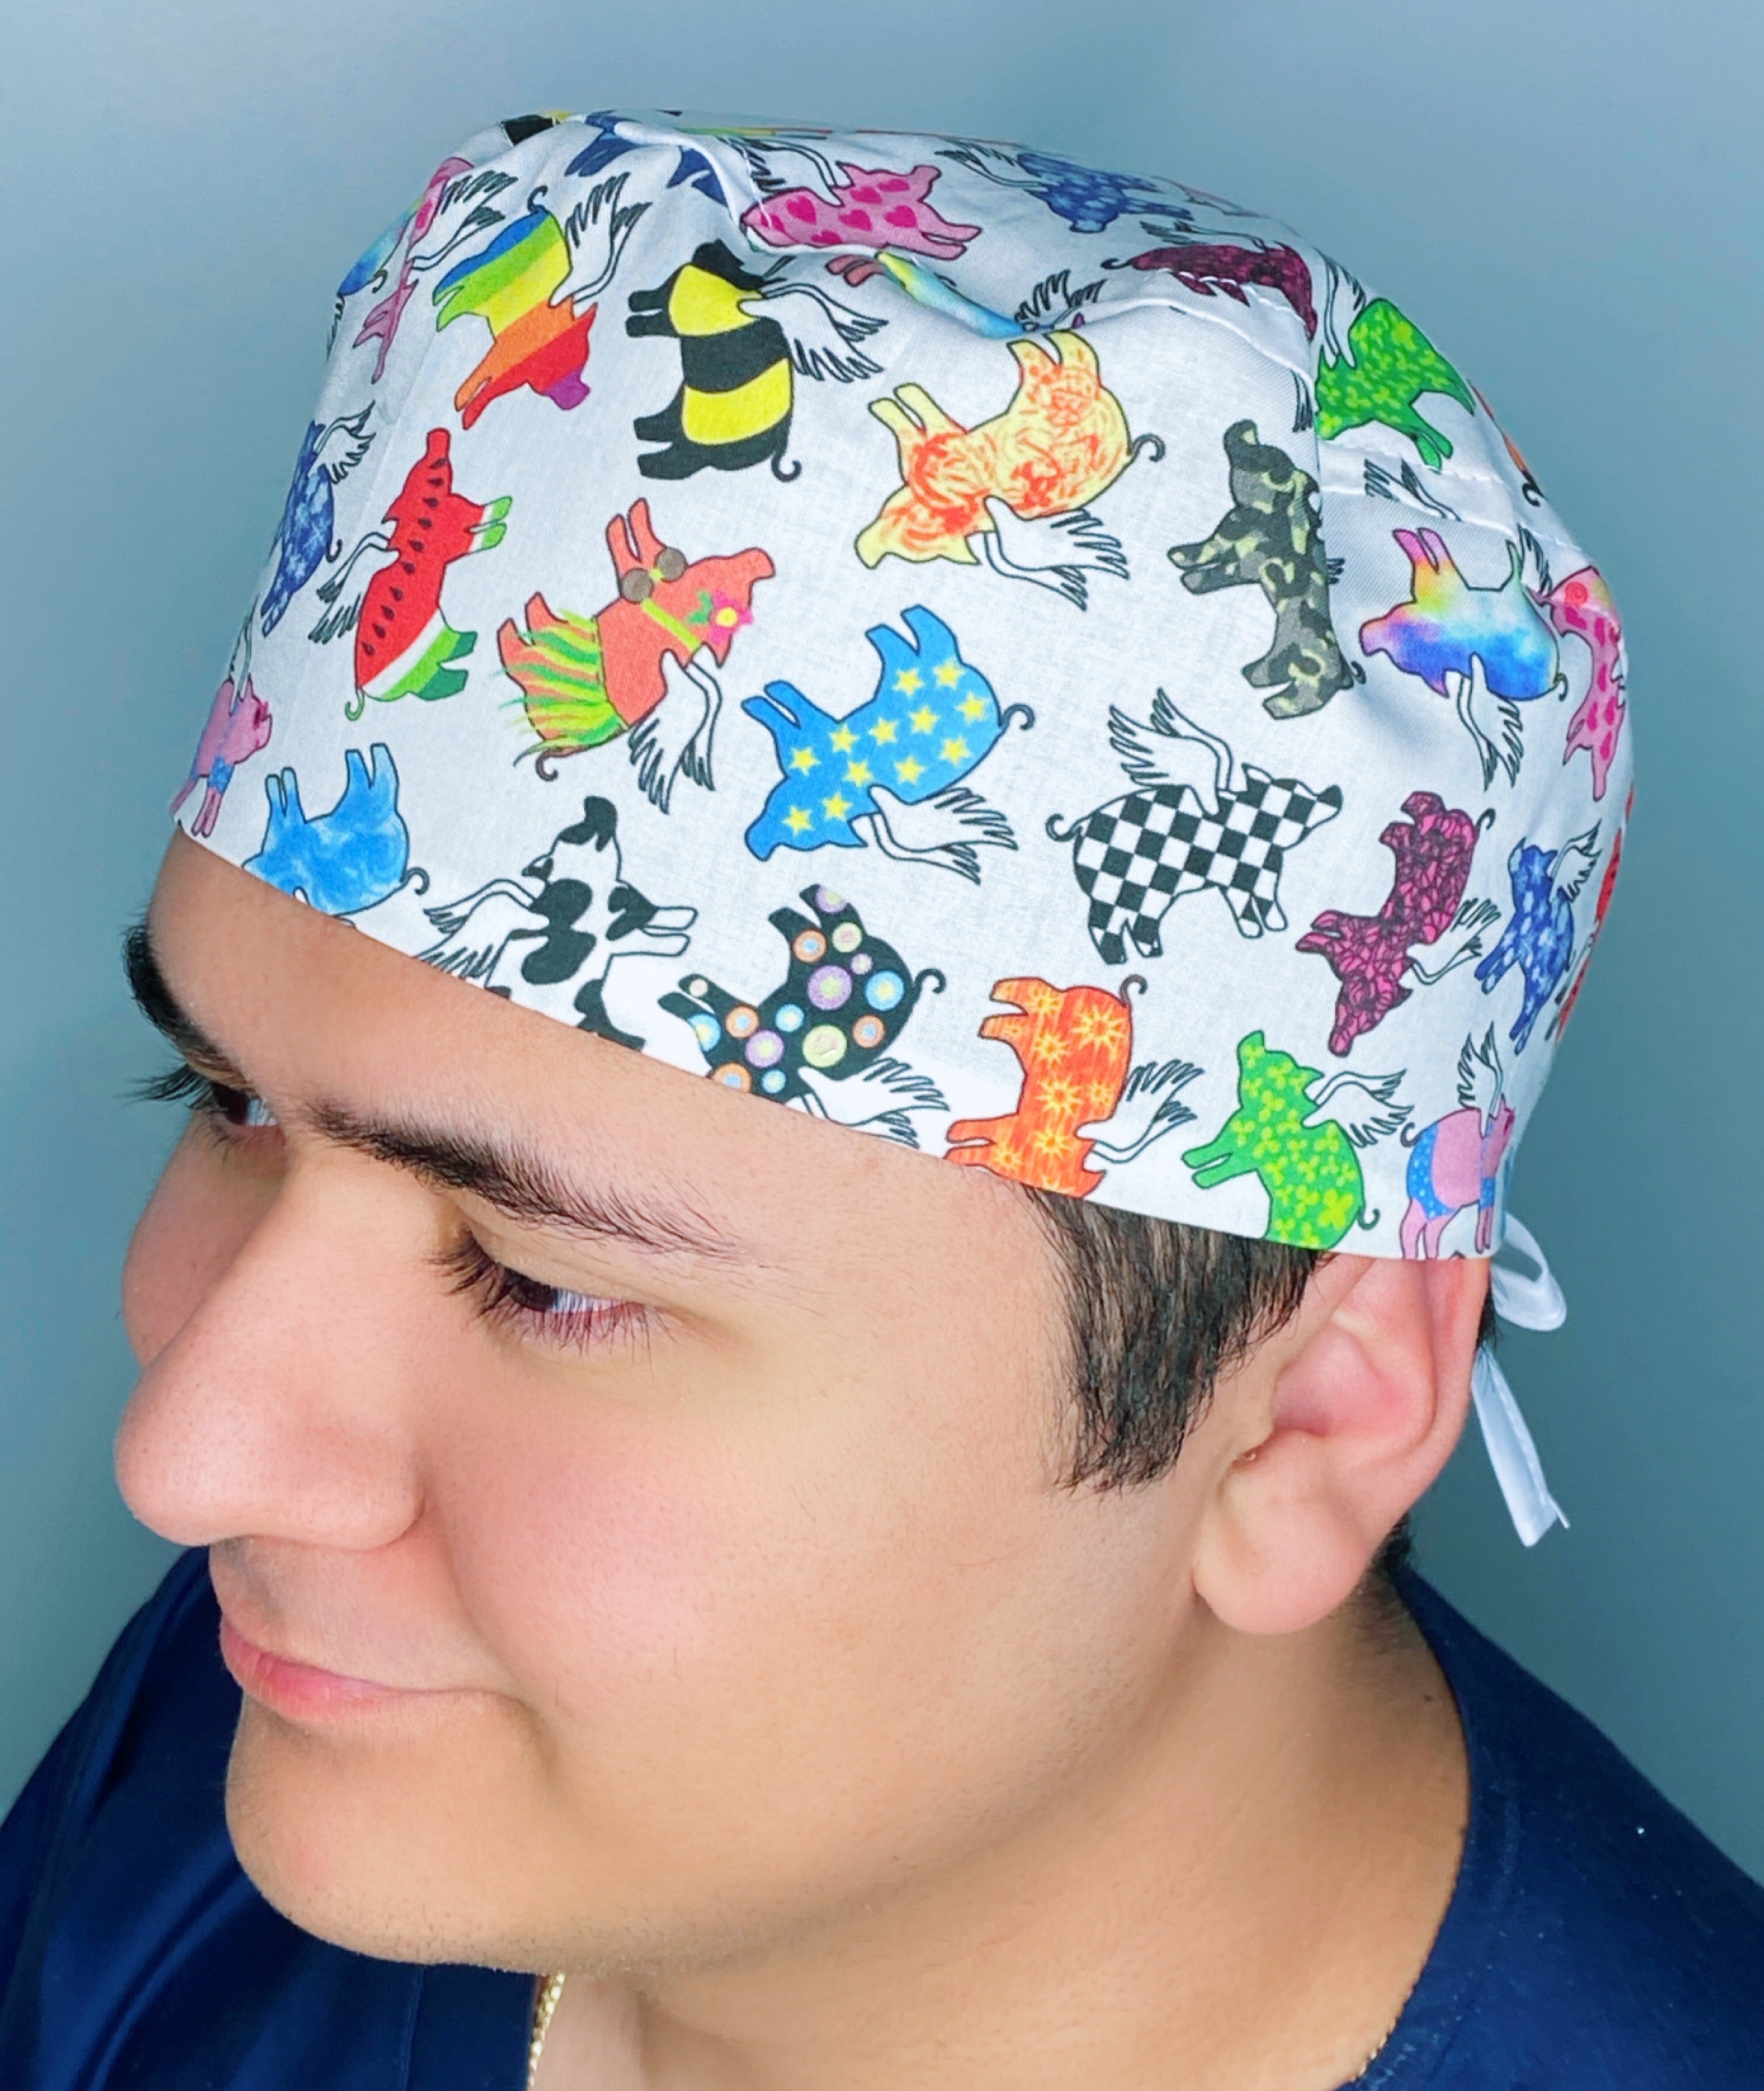 Different Flags Colorful Pigs Flying Unisex Animal Scrub Cap